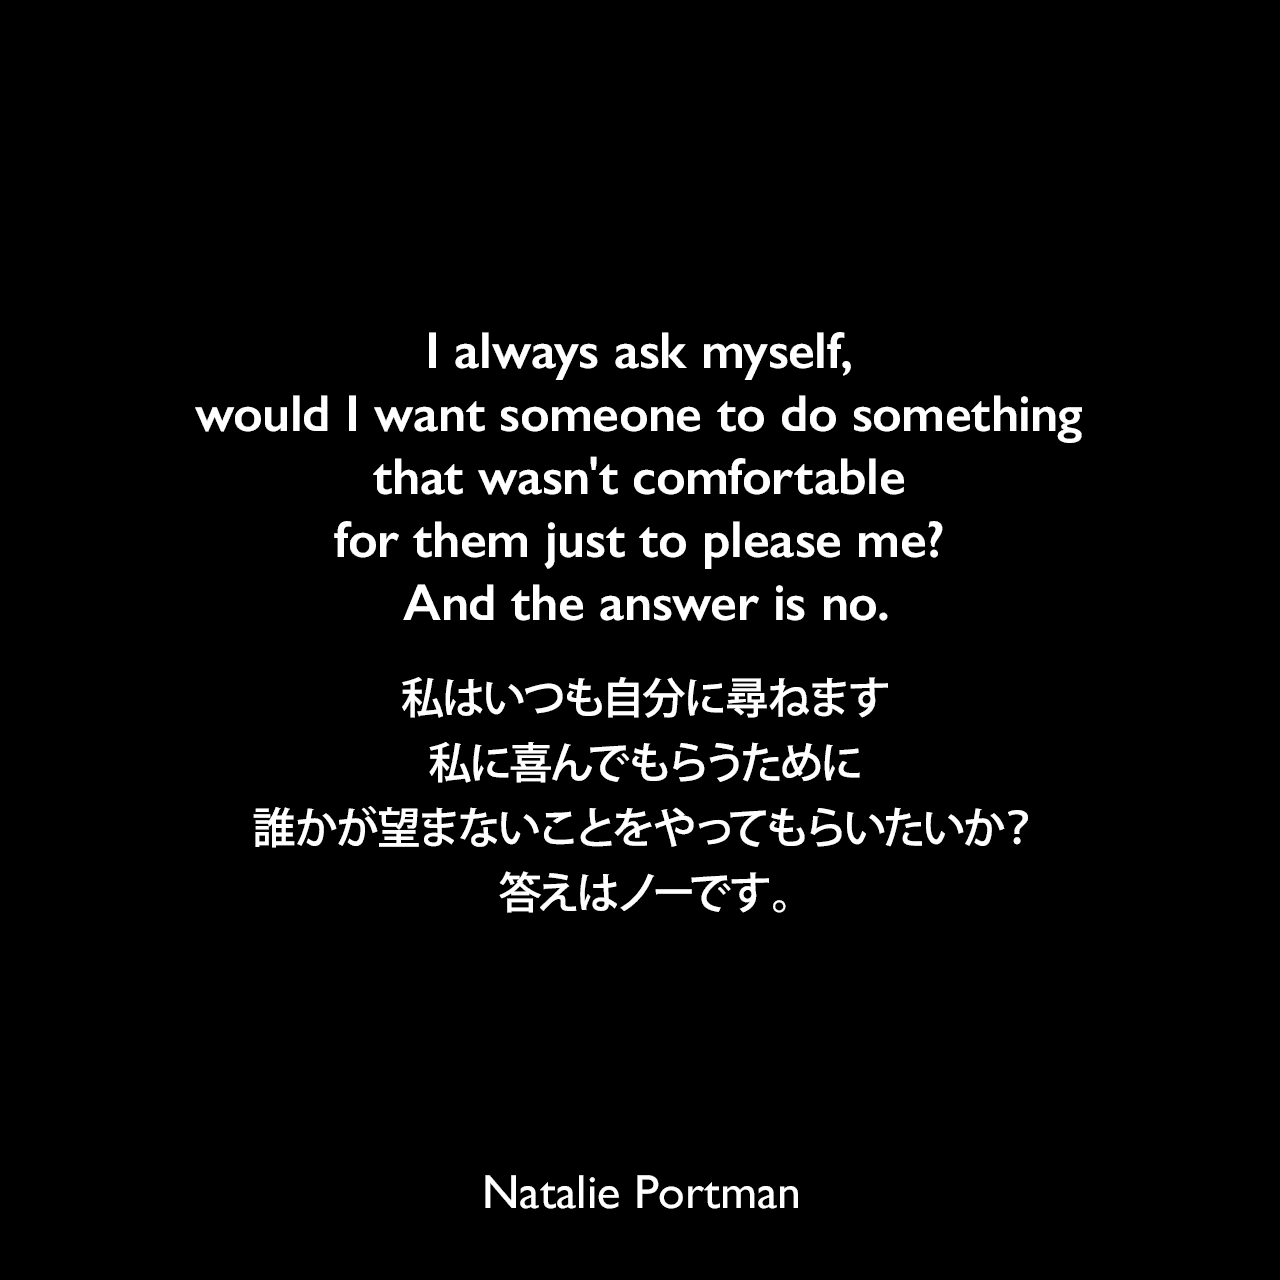 I always ask myself, would I want someone to do something that wasn't comfortable for them just to please me? And the answer is no.私はいつも自分に尋ねます、私に喜んでもらうために誰かが望まないことをやってもらいたいか？答えはノーです。Natalie Portman